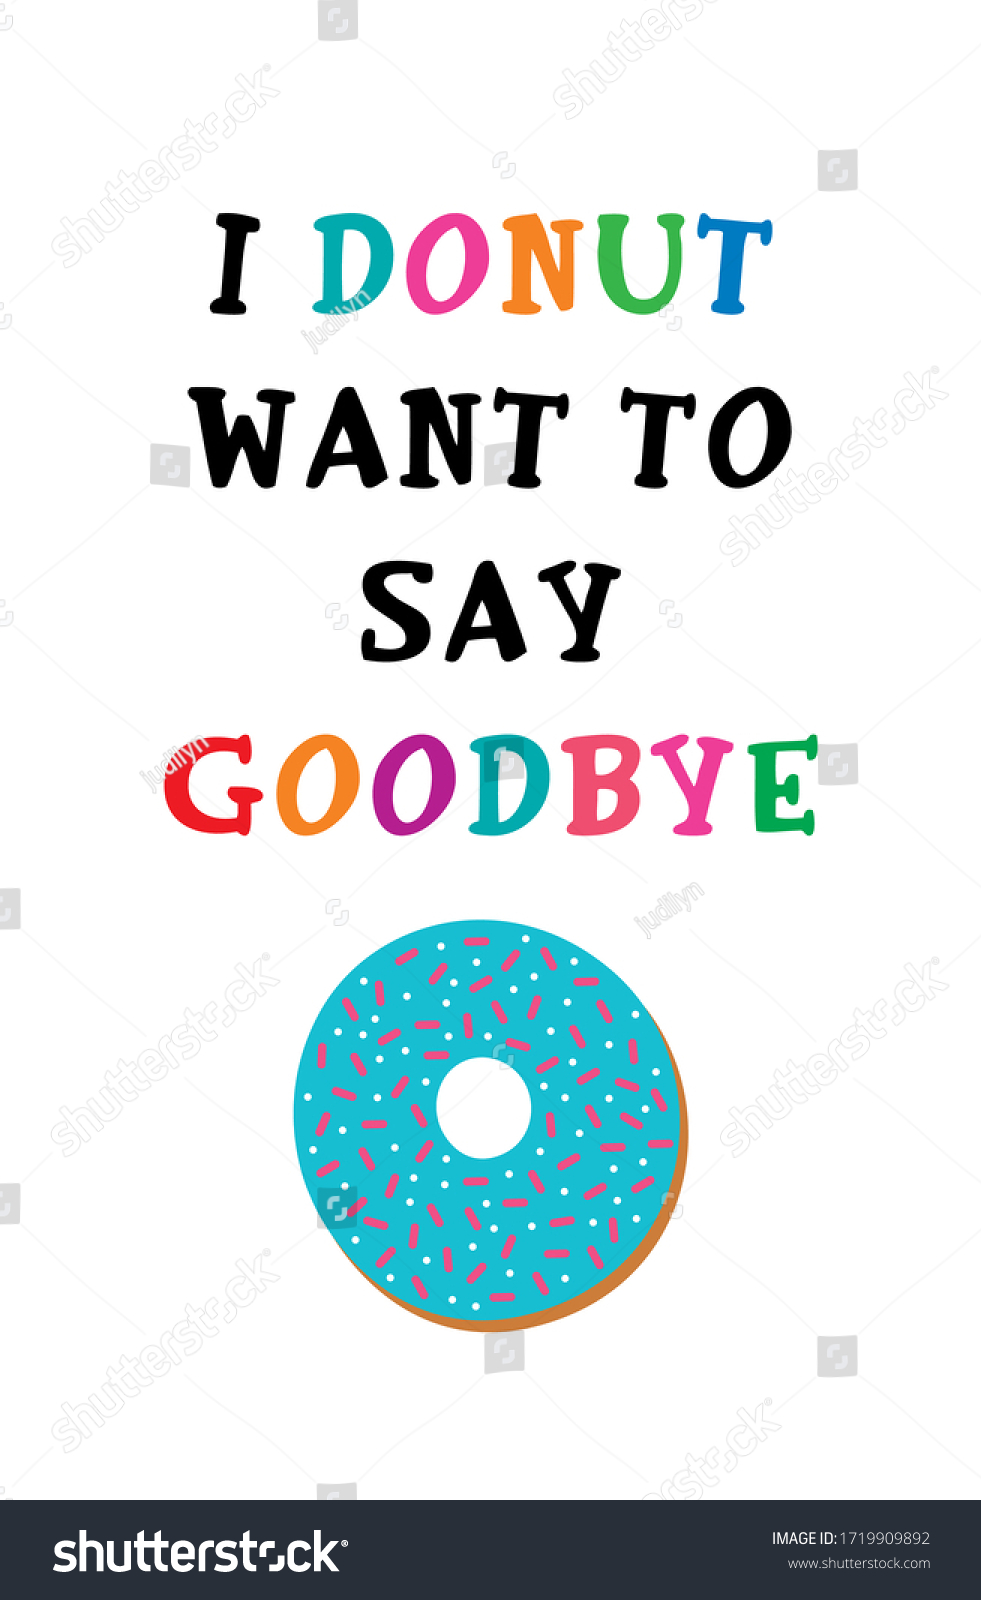 Donut Want Say Goodbye Poster Vector Stock Vector Royalty Free Shutterstock